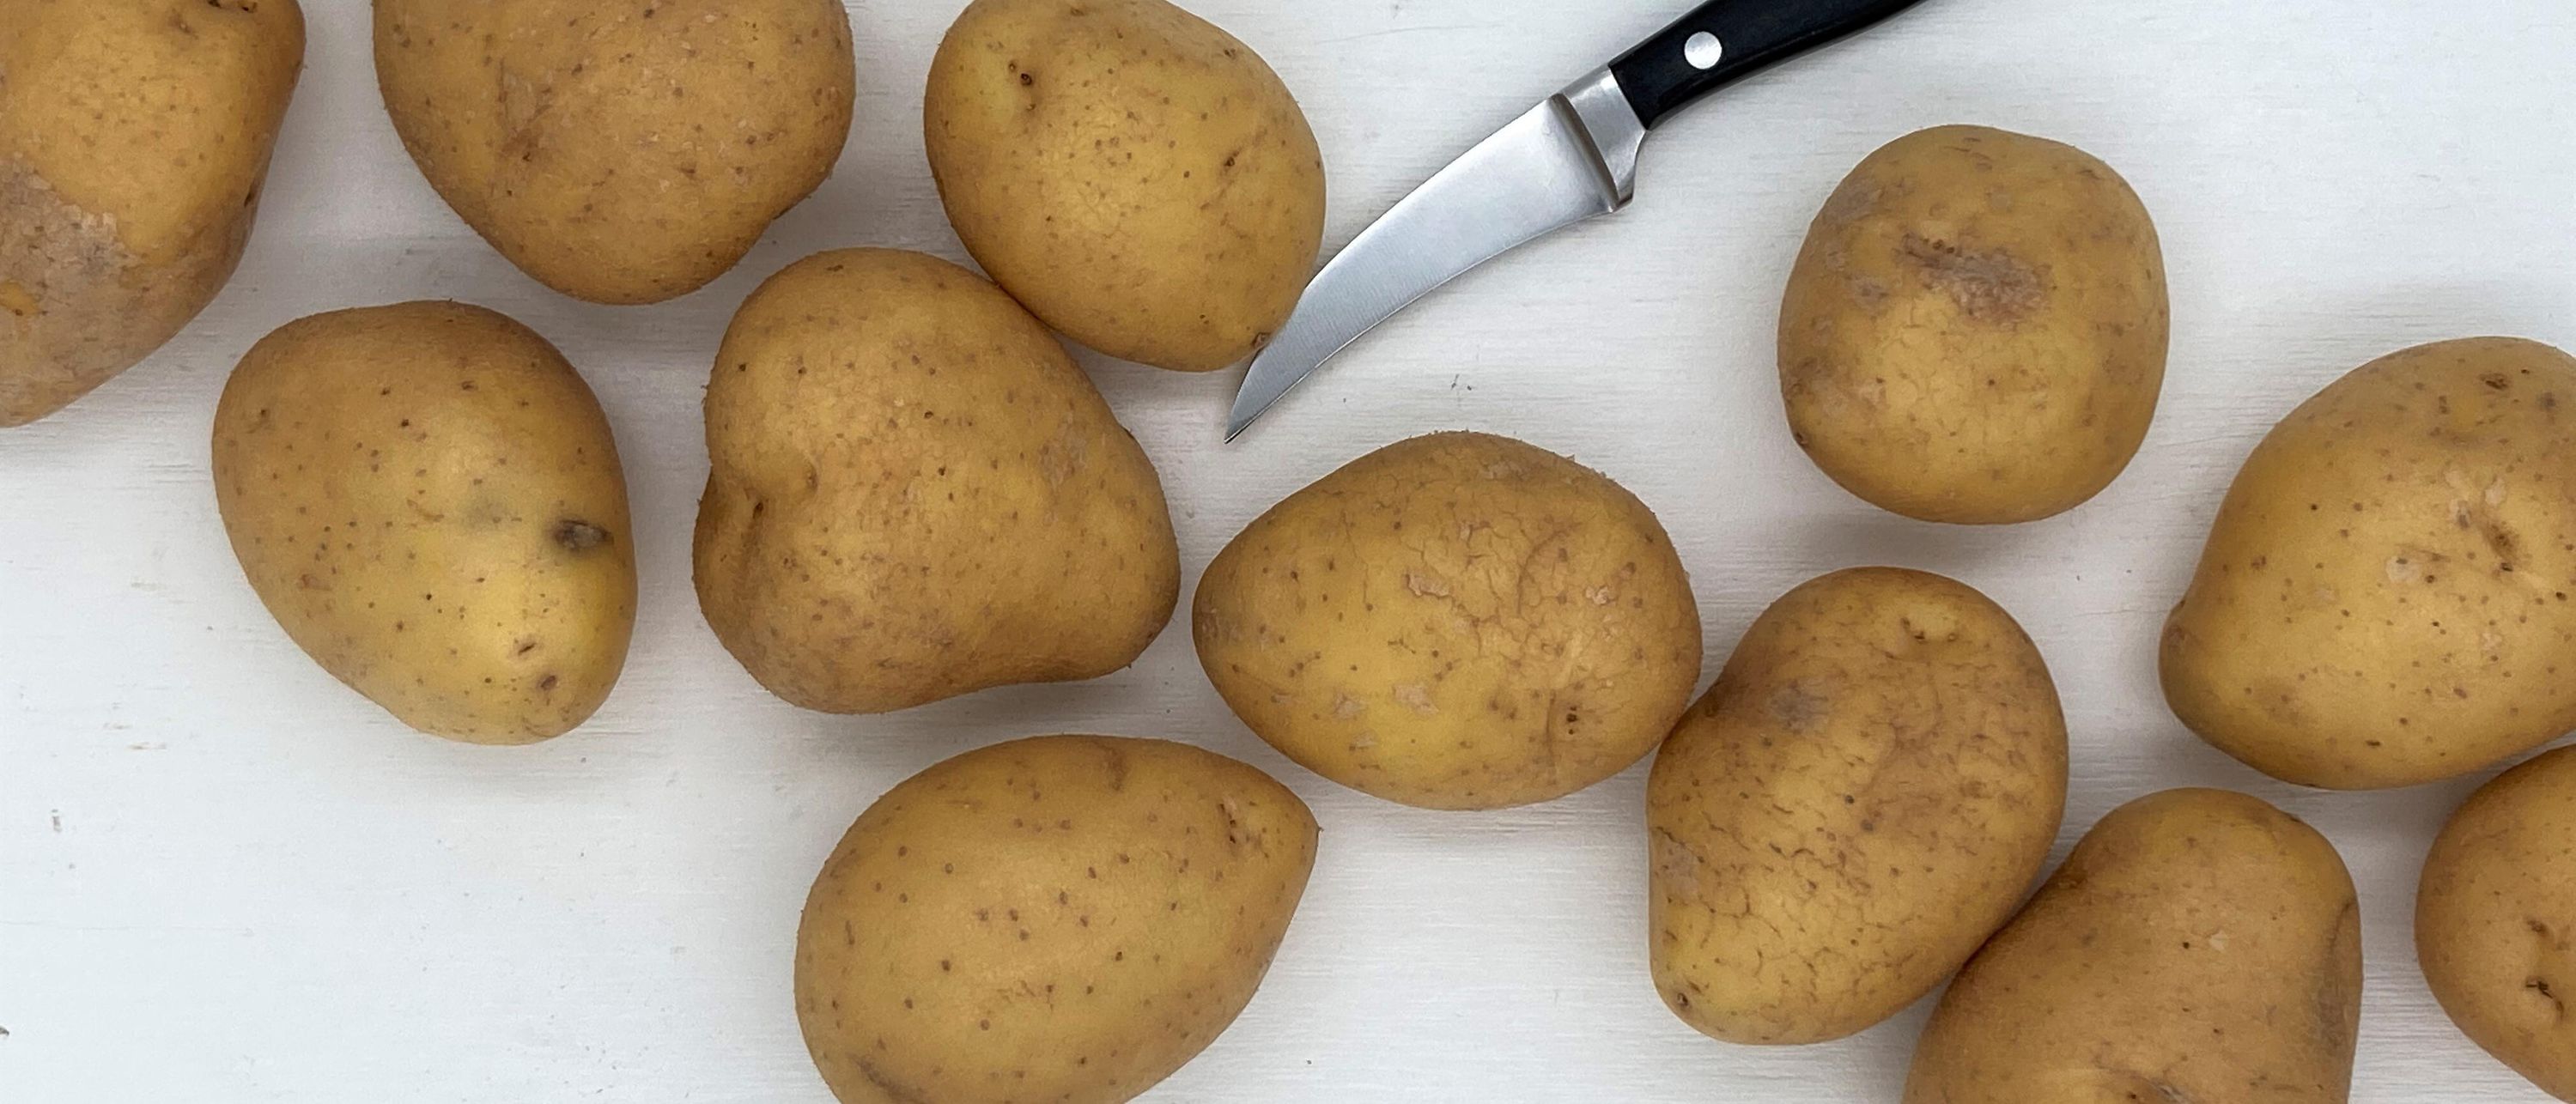 potatoes laying on white tray with kitchen knife